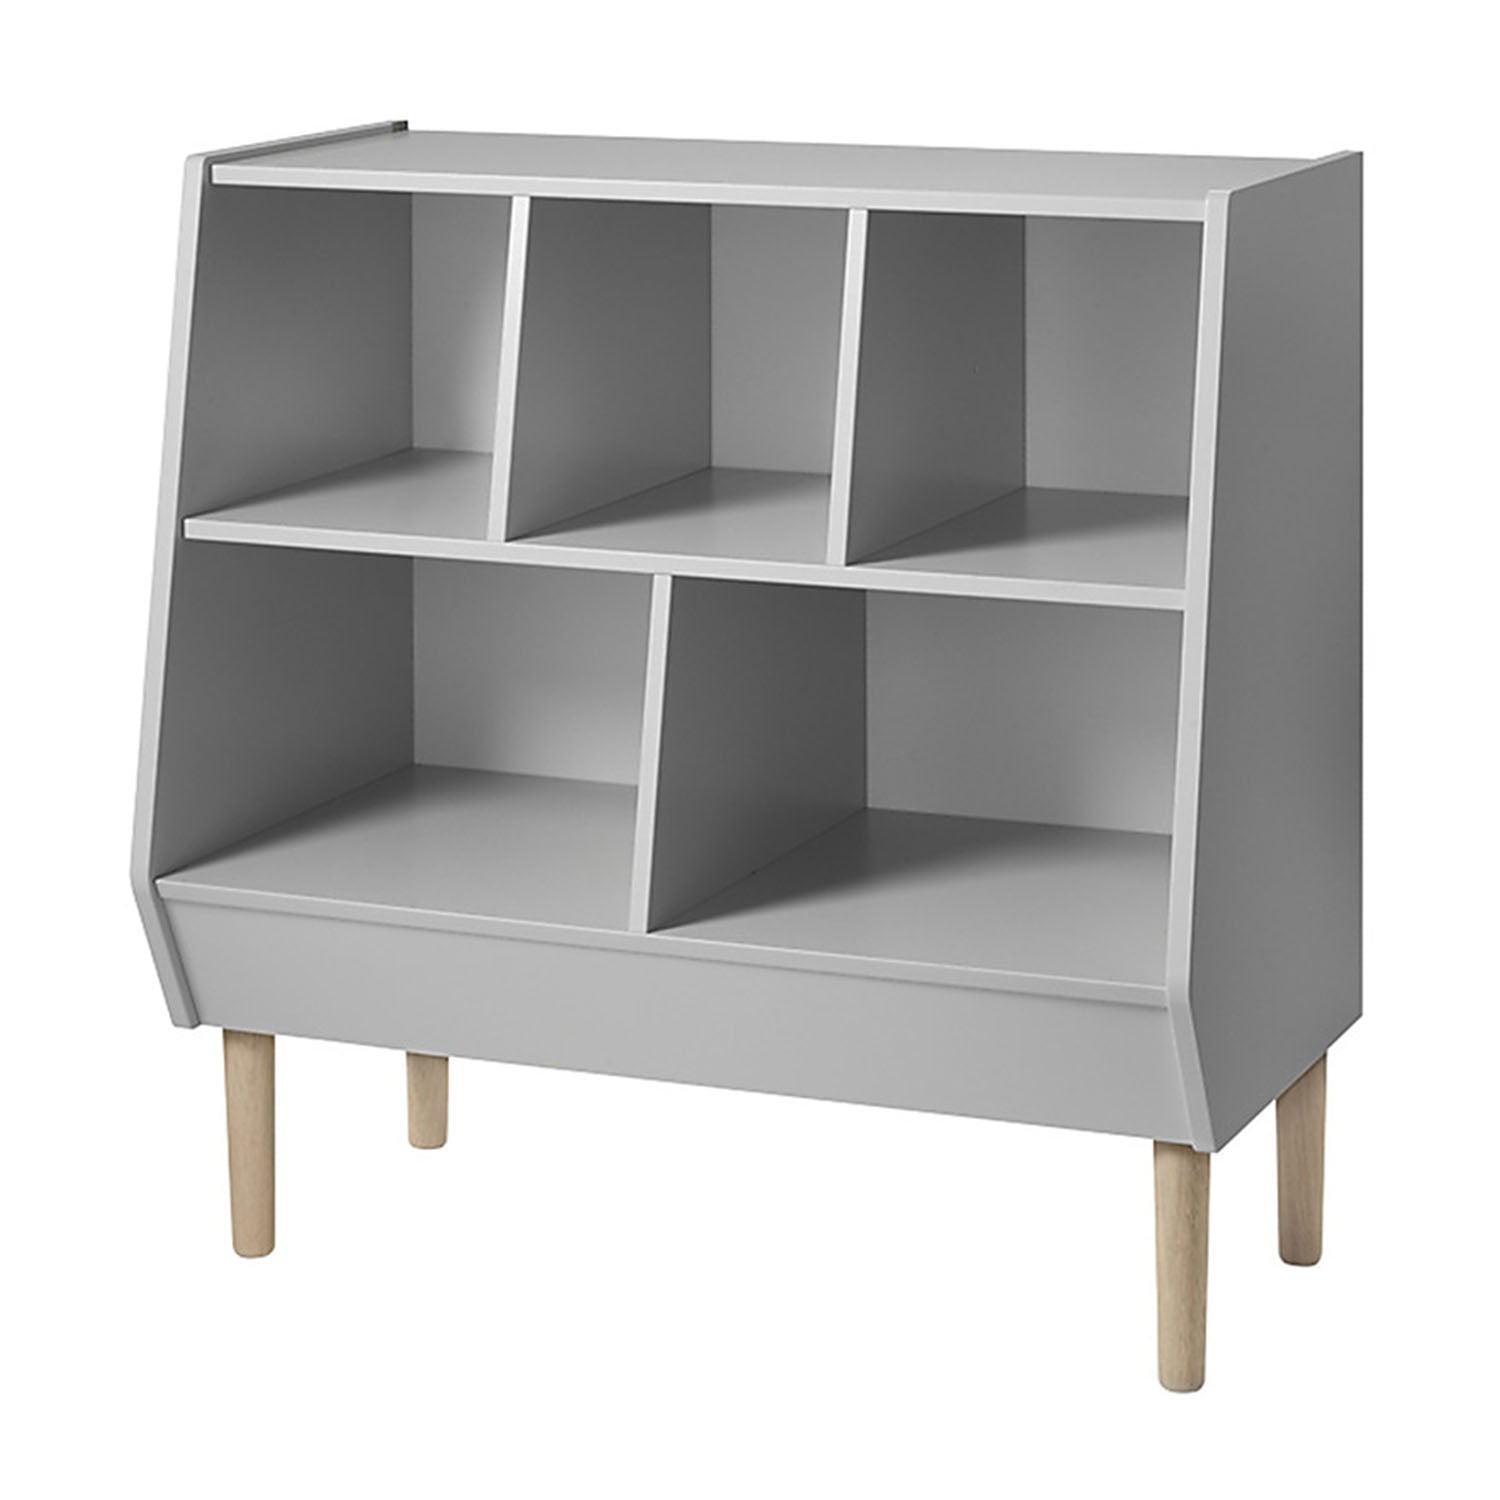 An image of Done By Deer Buy Baby Storage Rack Shelf Unit by Done by Deer Grey